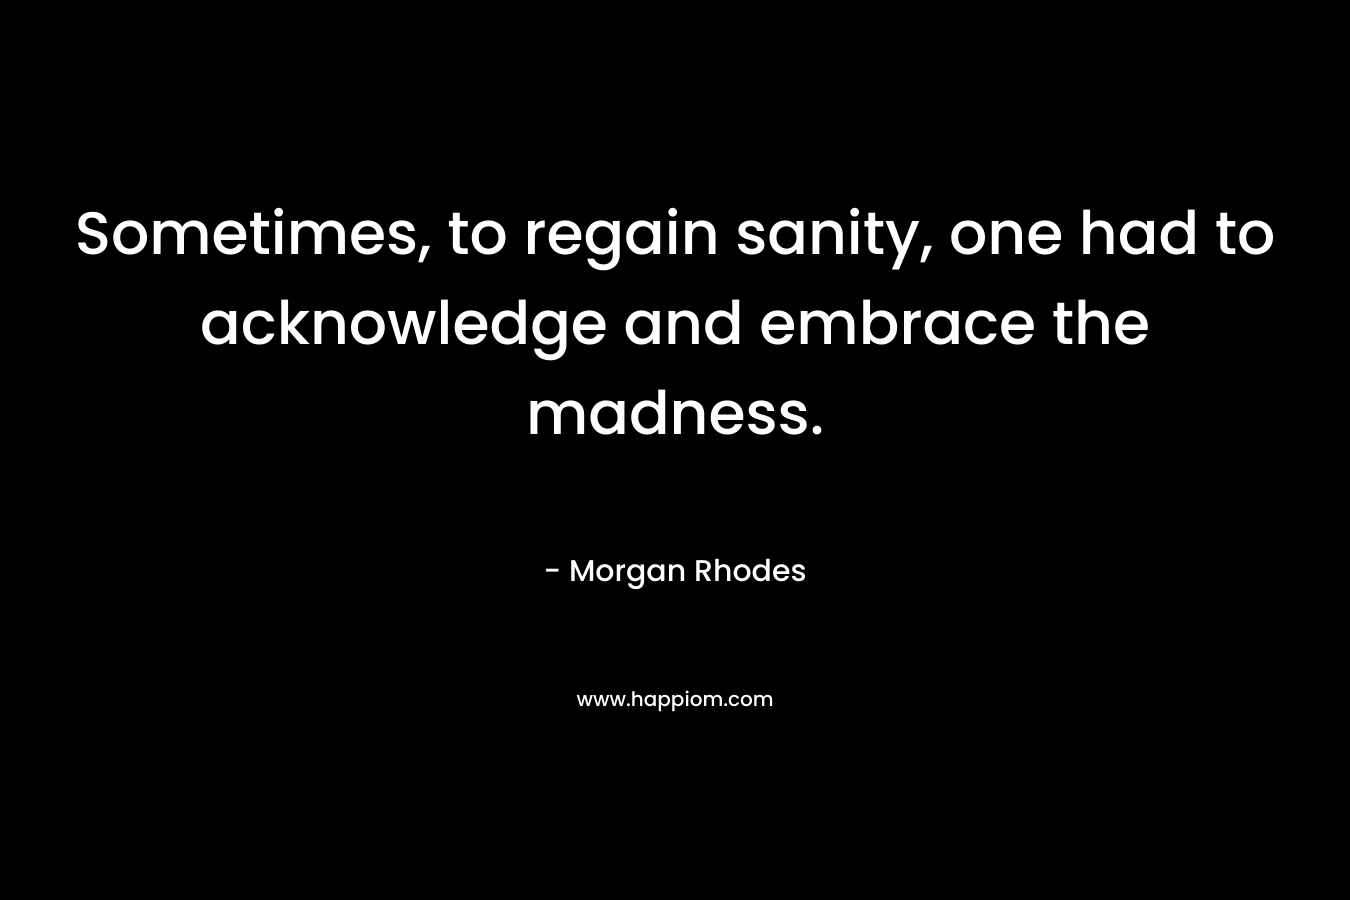 Sometimes, to regain sanity, one had to acknowledge and embrace the madness. – Morgan Rhodes